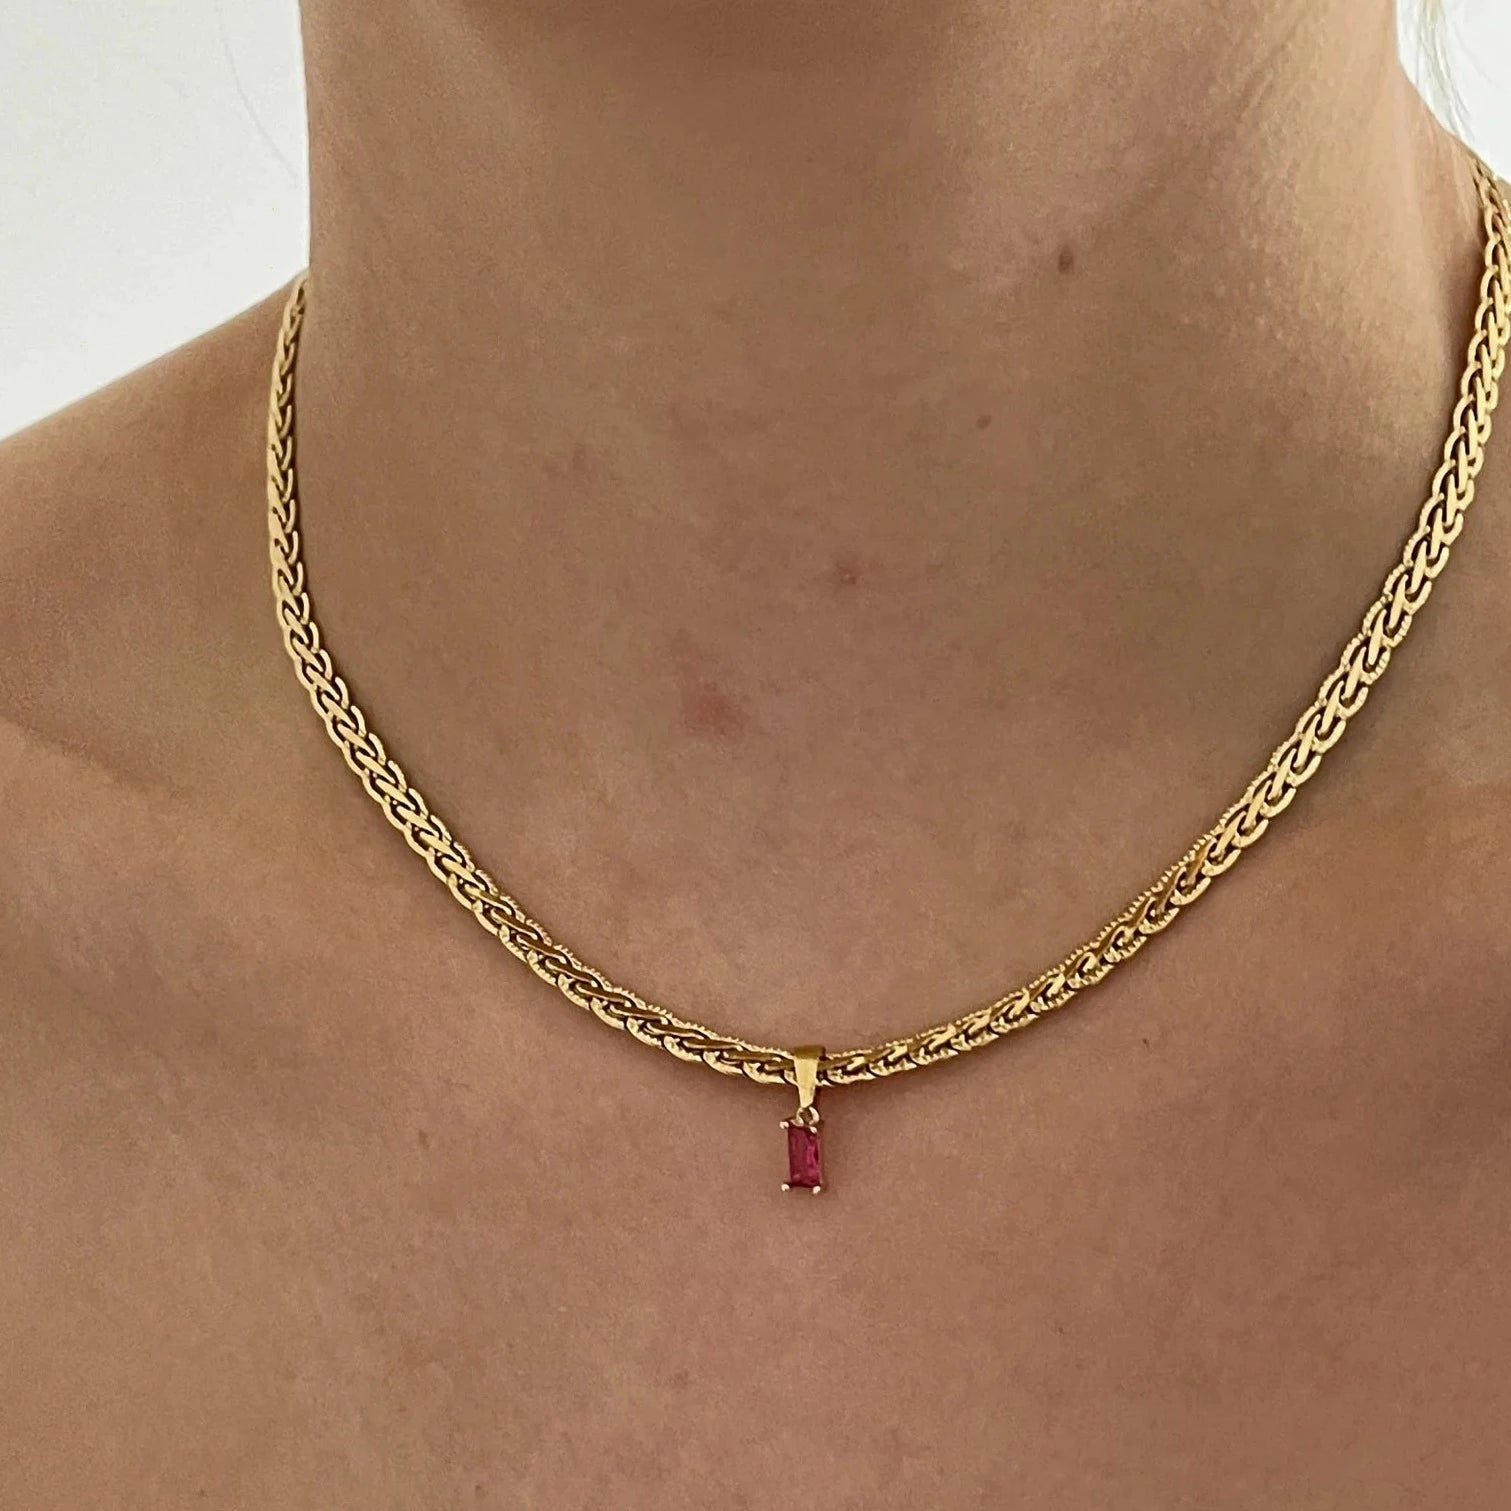 Red Gem Necklace - Cosmic Chains 